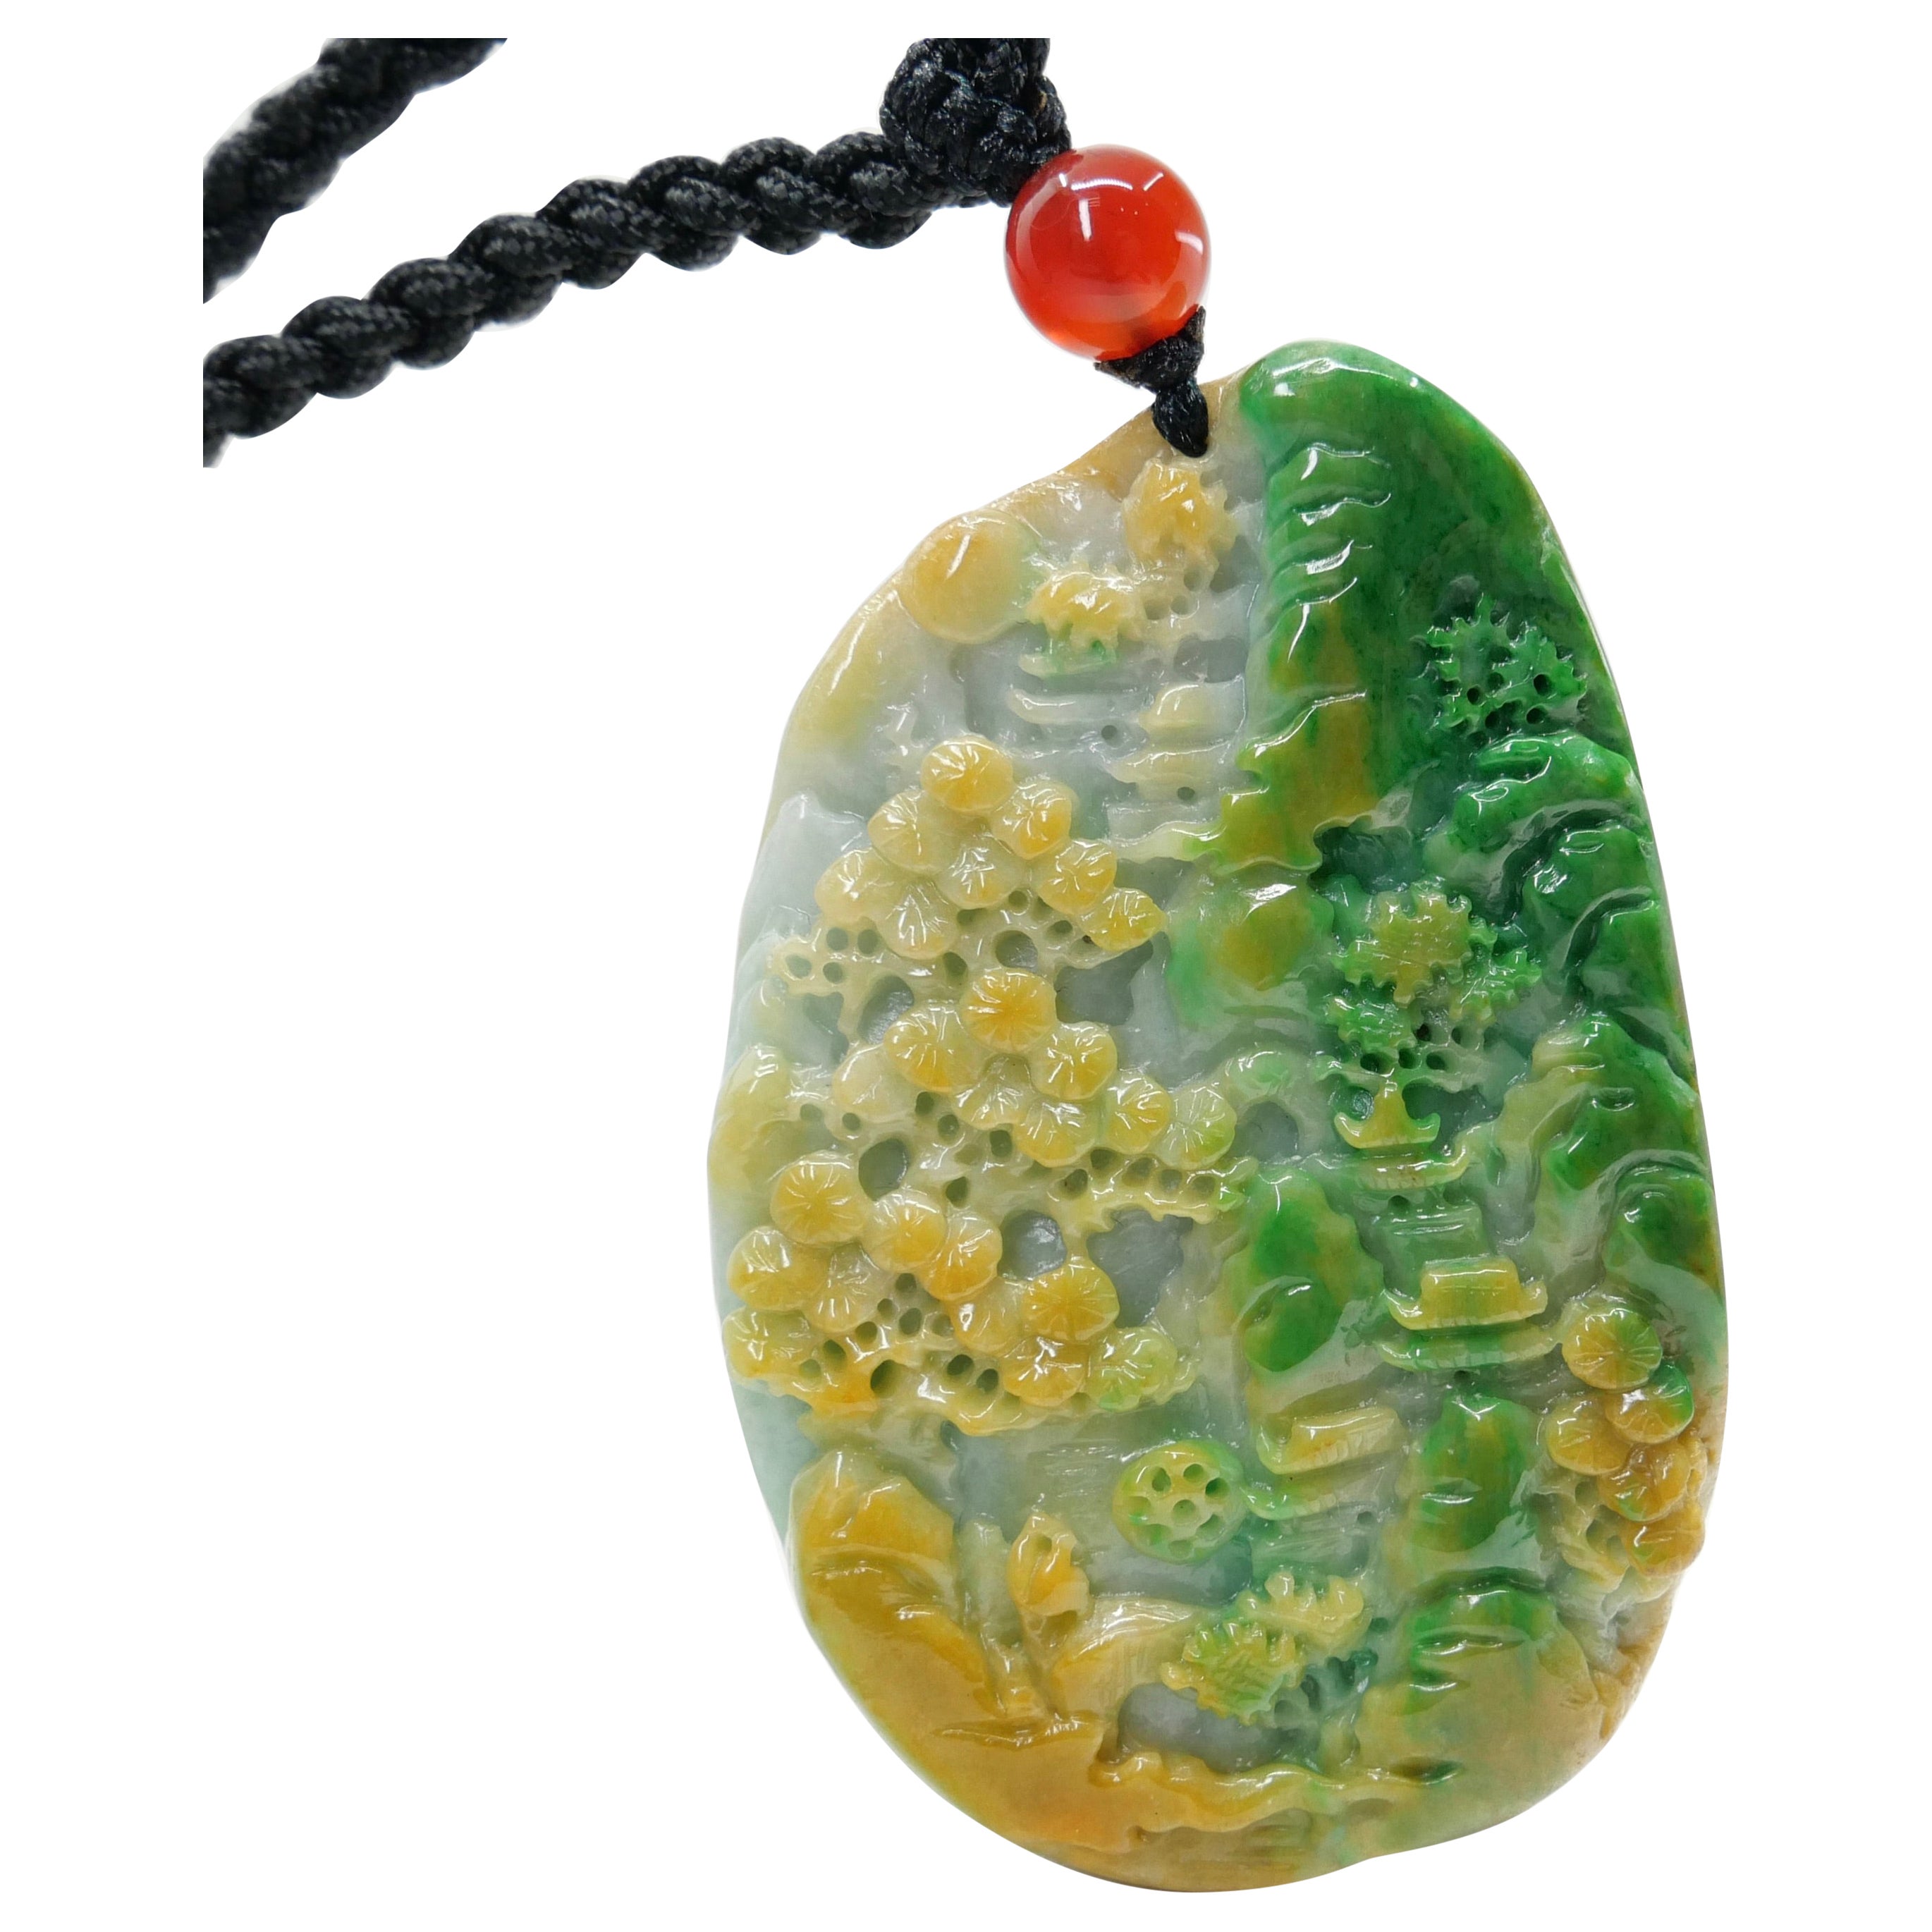 Certified Natural Multi Color Jade & Agate Pendant Necklace, Exquisite Carving For Sale